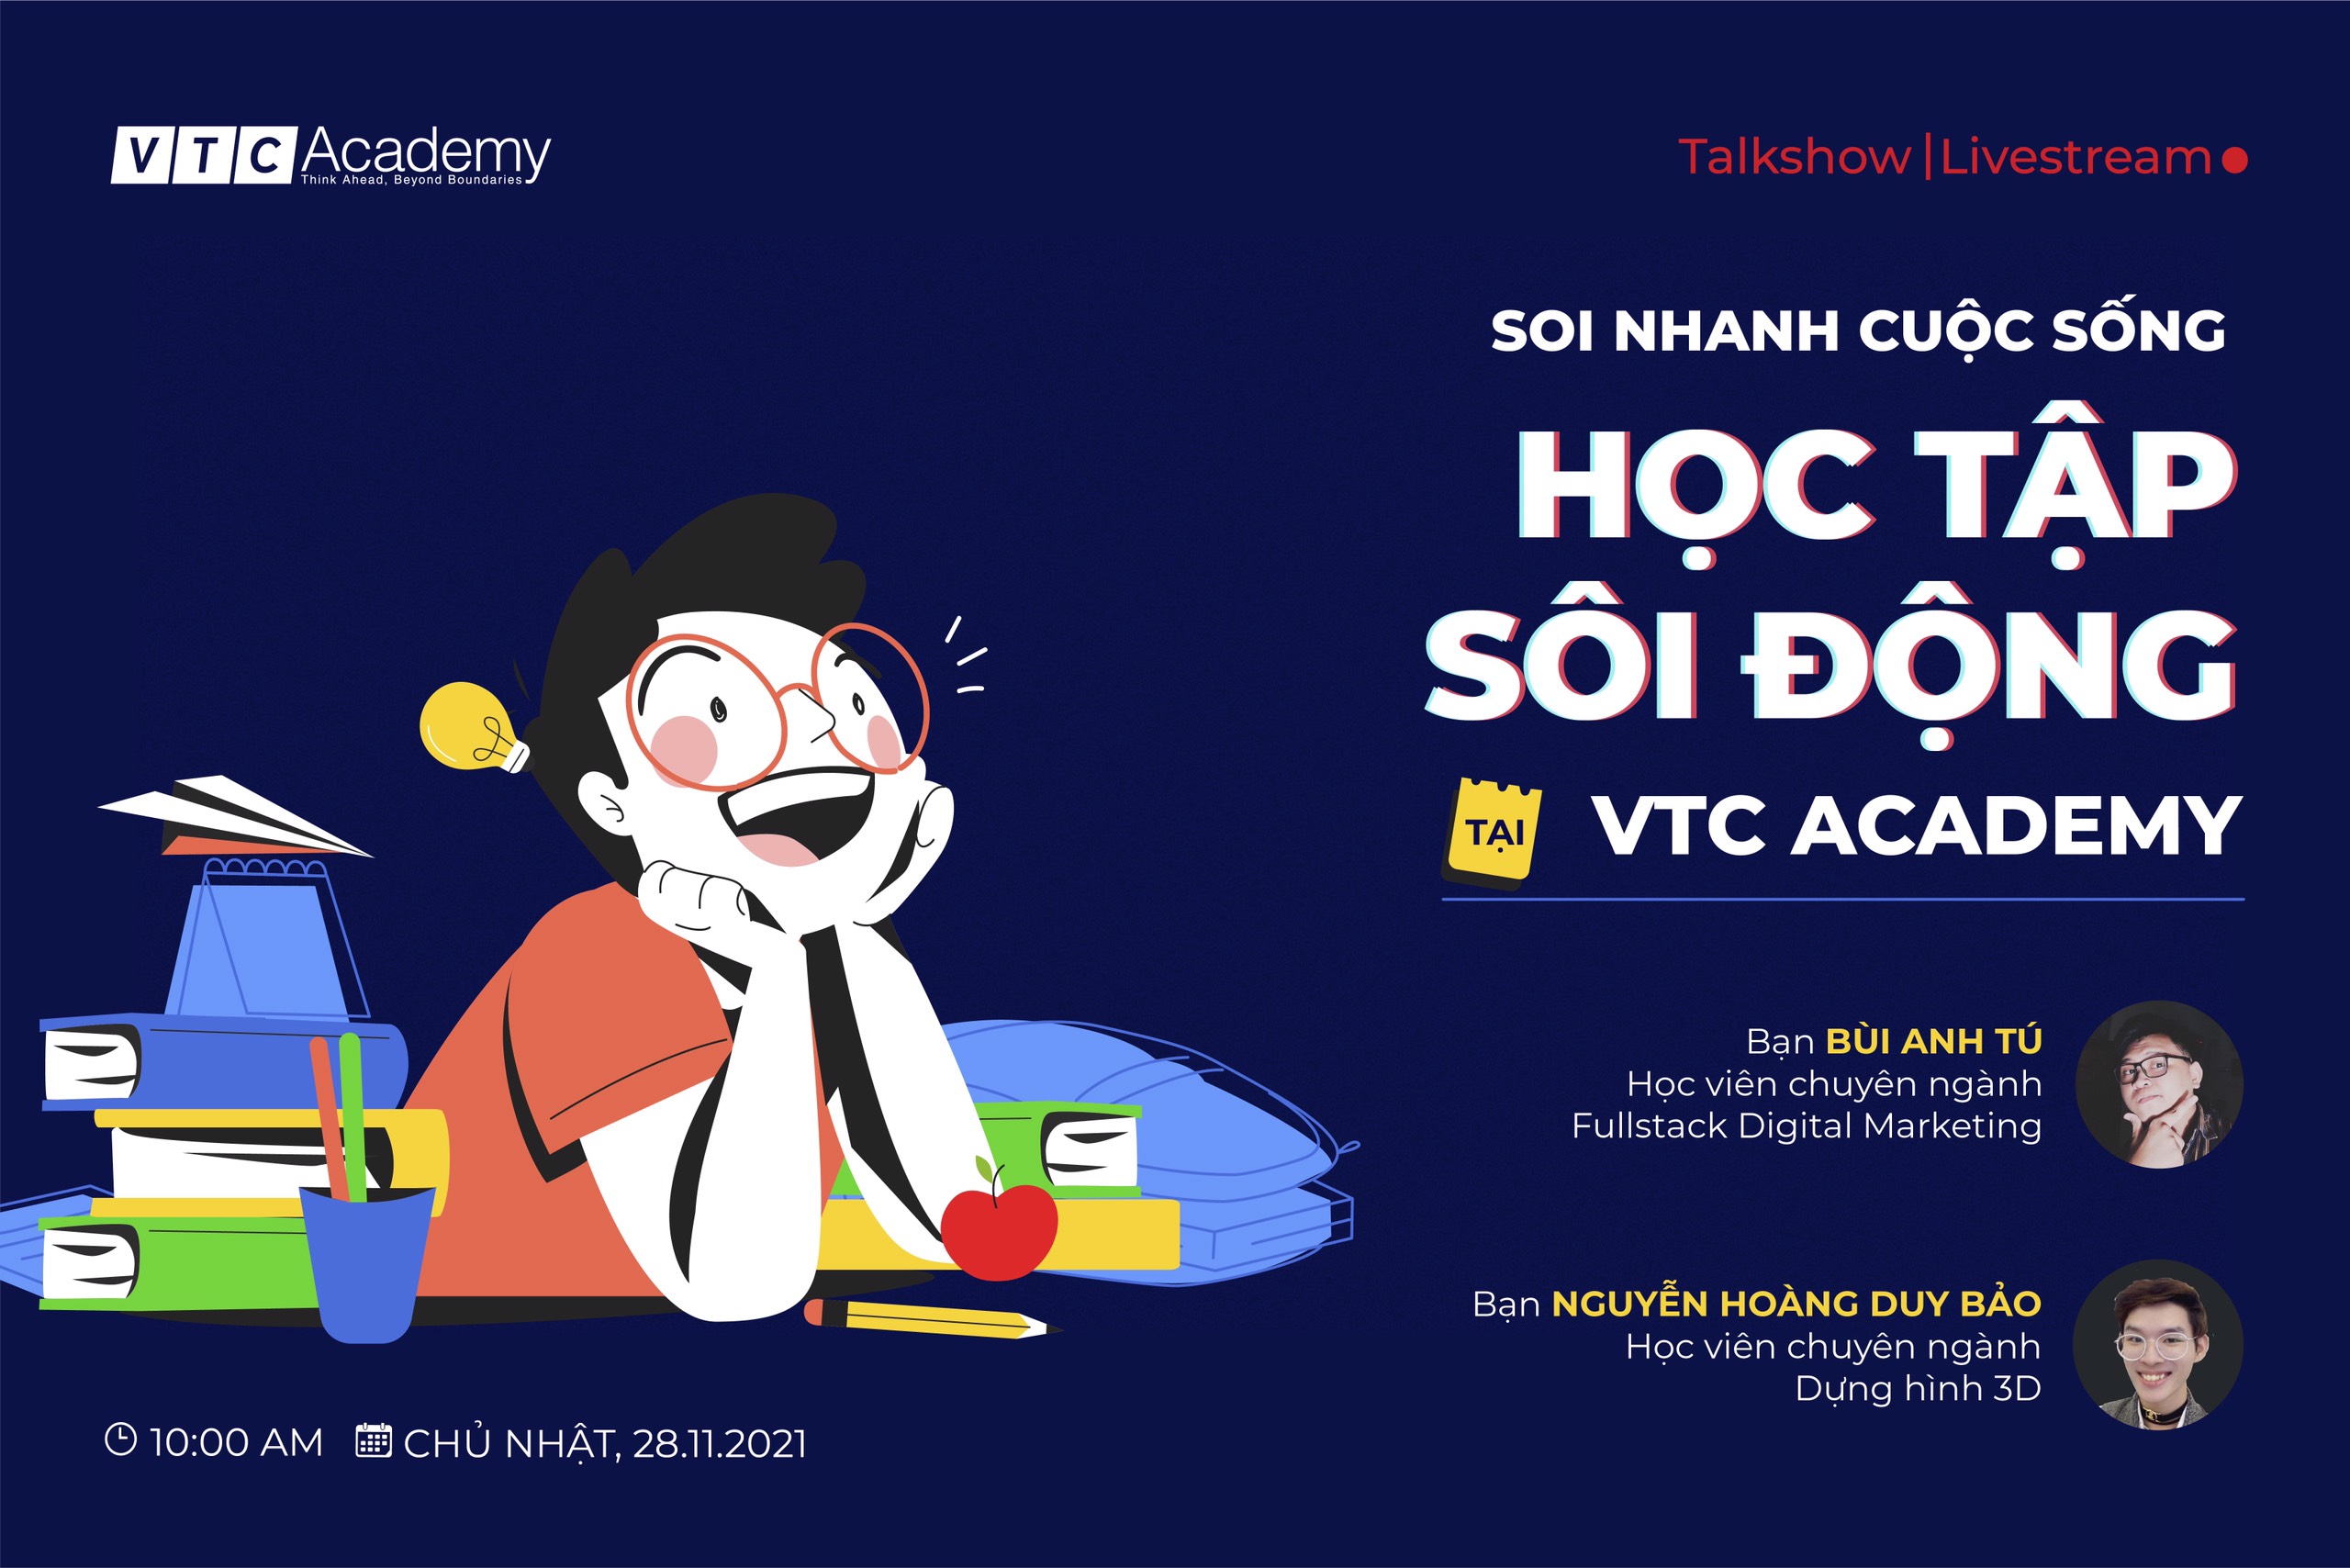 Online talkshow: “Take a look at the exciting academic life at VTC Academy”